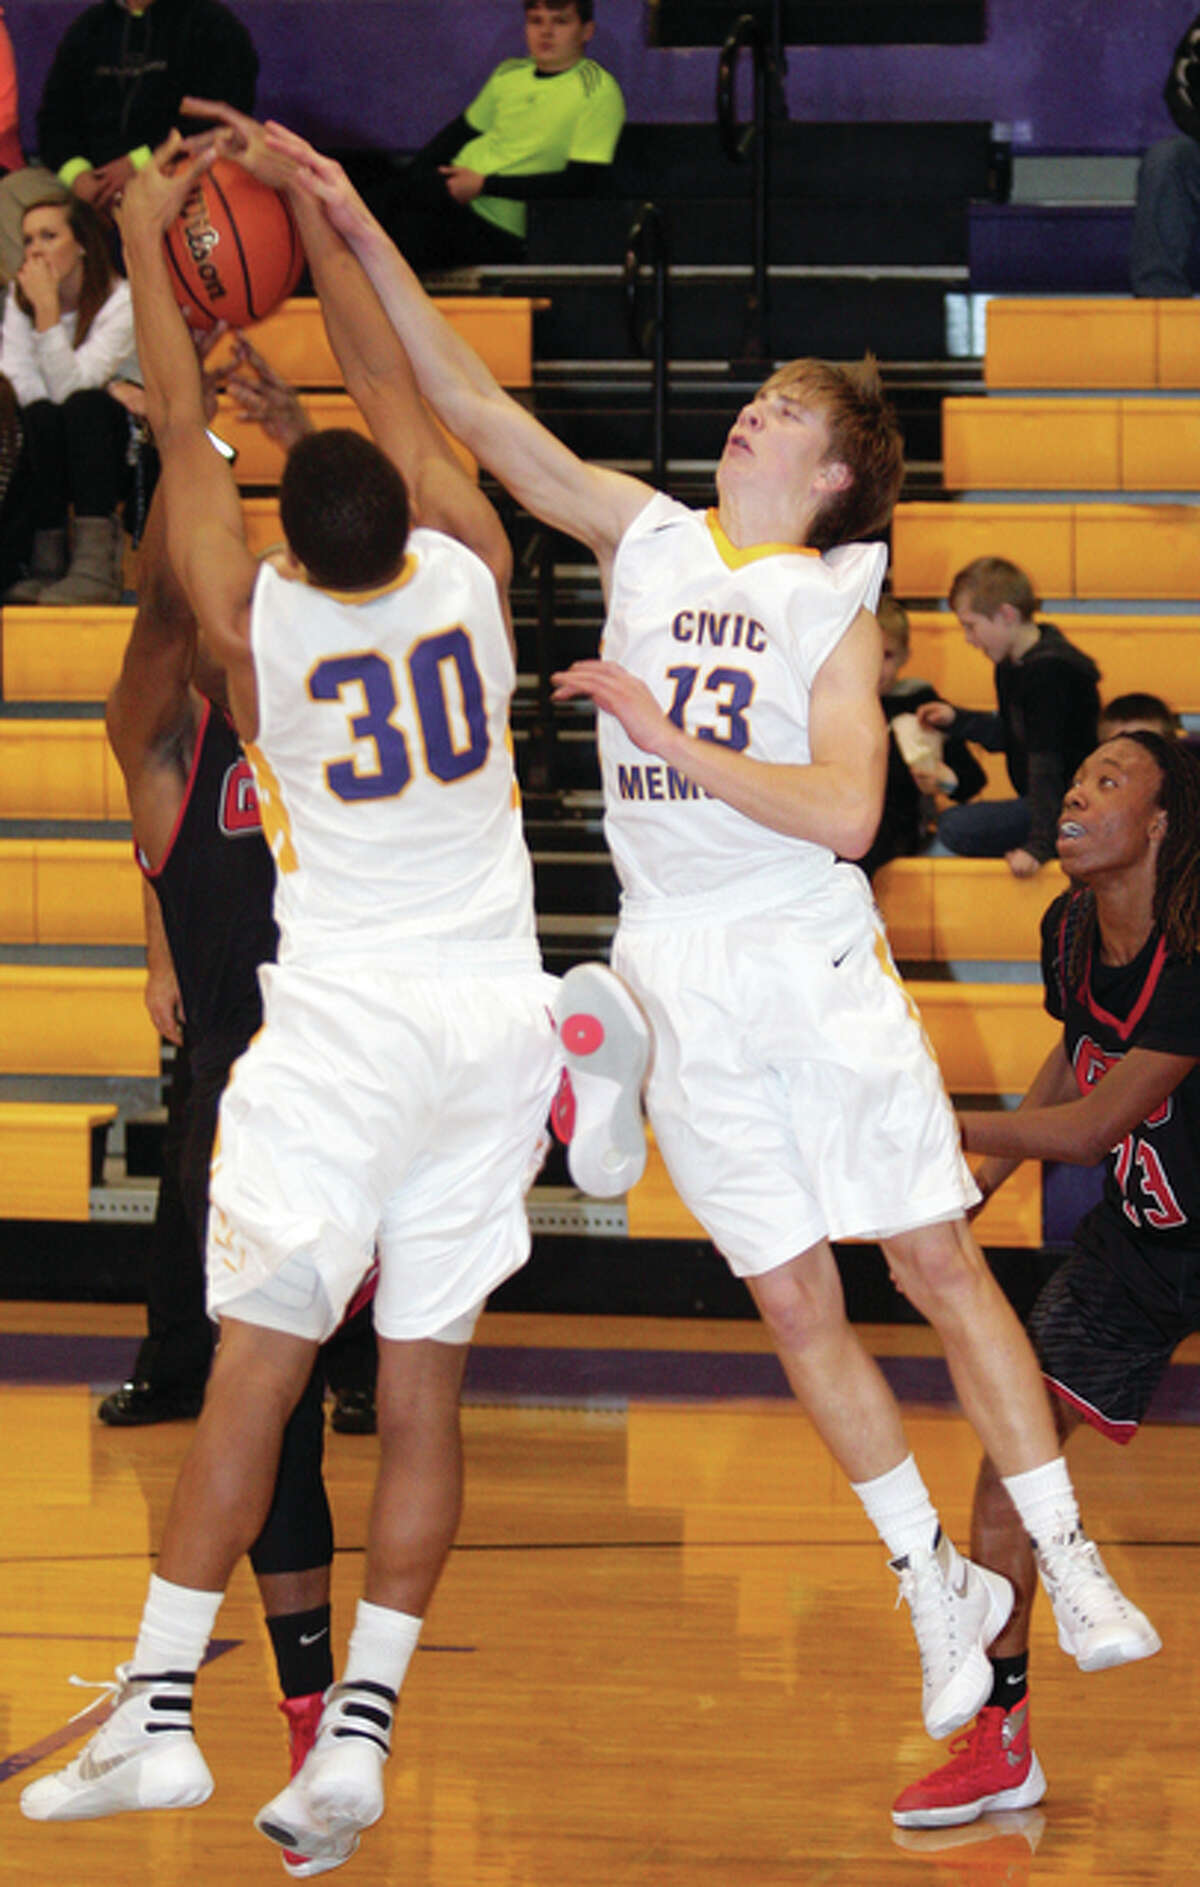 CM’s JaAQuan Adams, center, and David Lane, right, fight for a rebound with Granite City’s Ronn Allen, back, Tuesday.